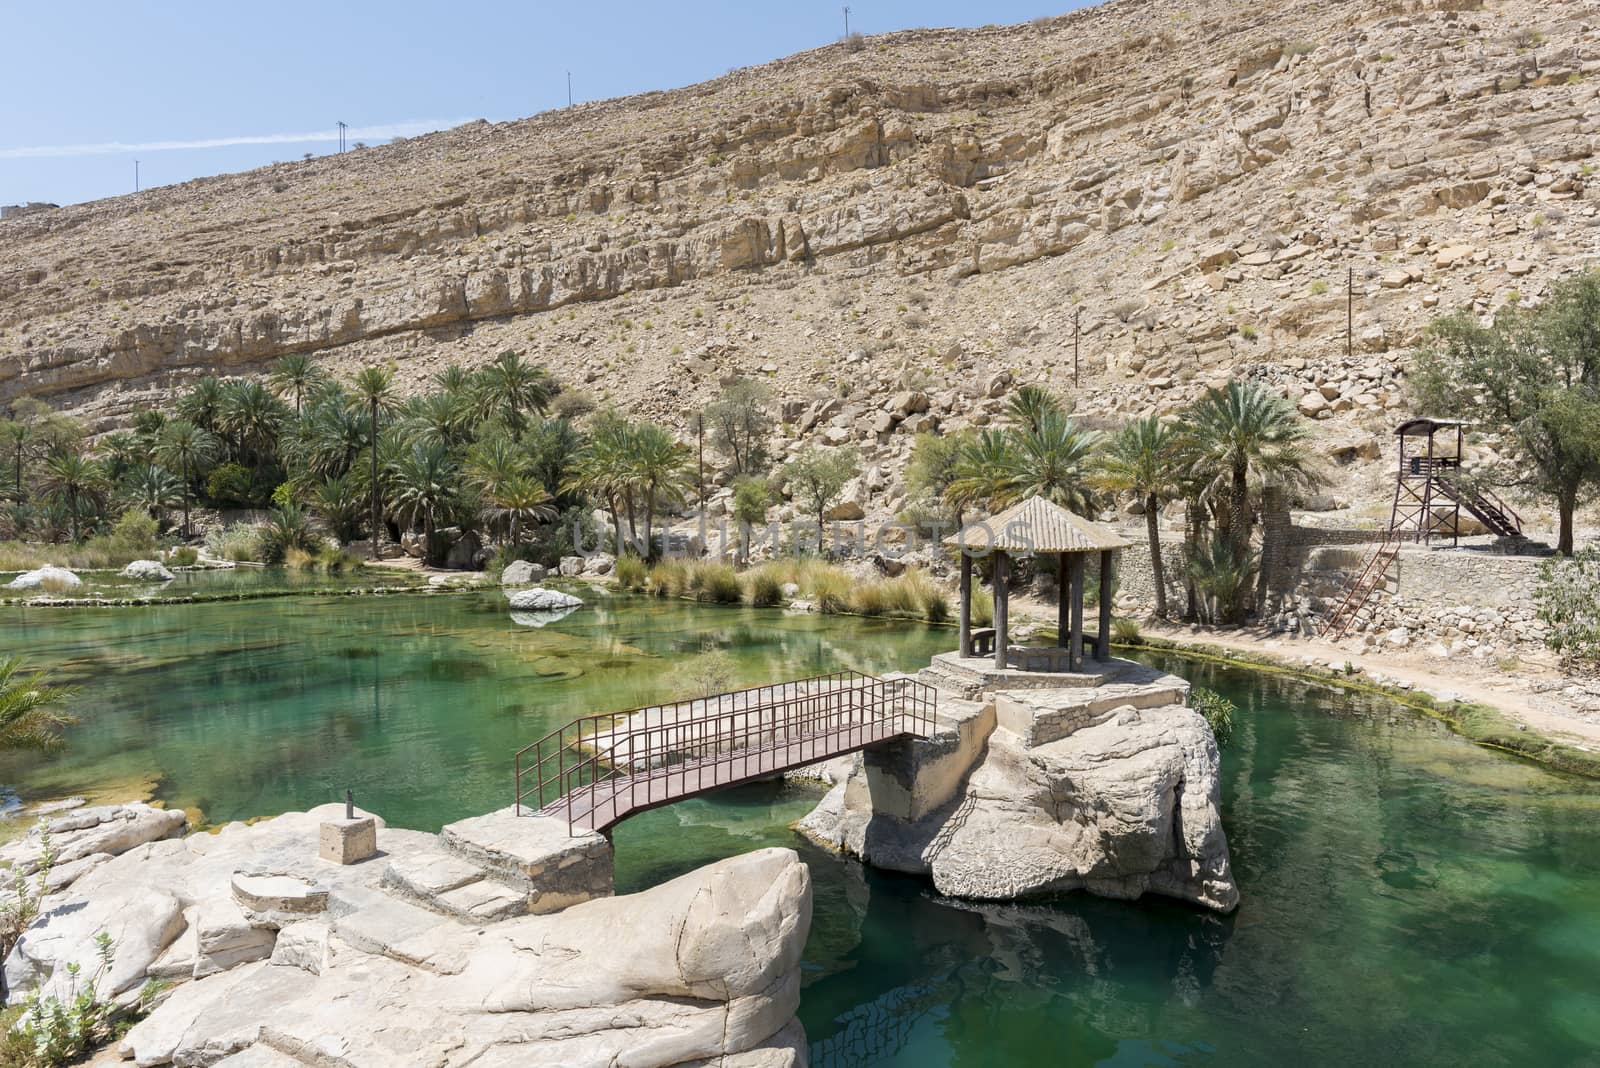 Rest area in one of the pool of Wadi Bani Khalid, Oman by GABIS